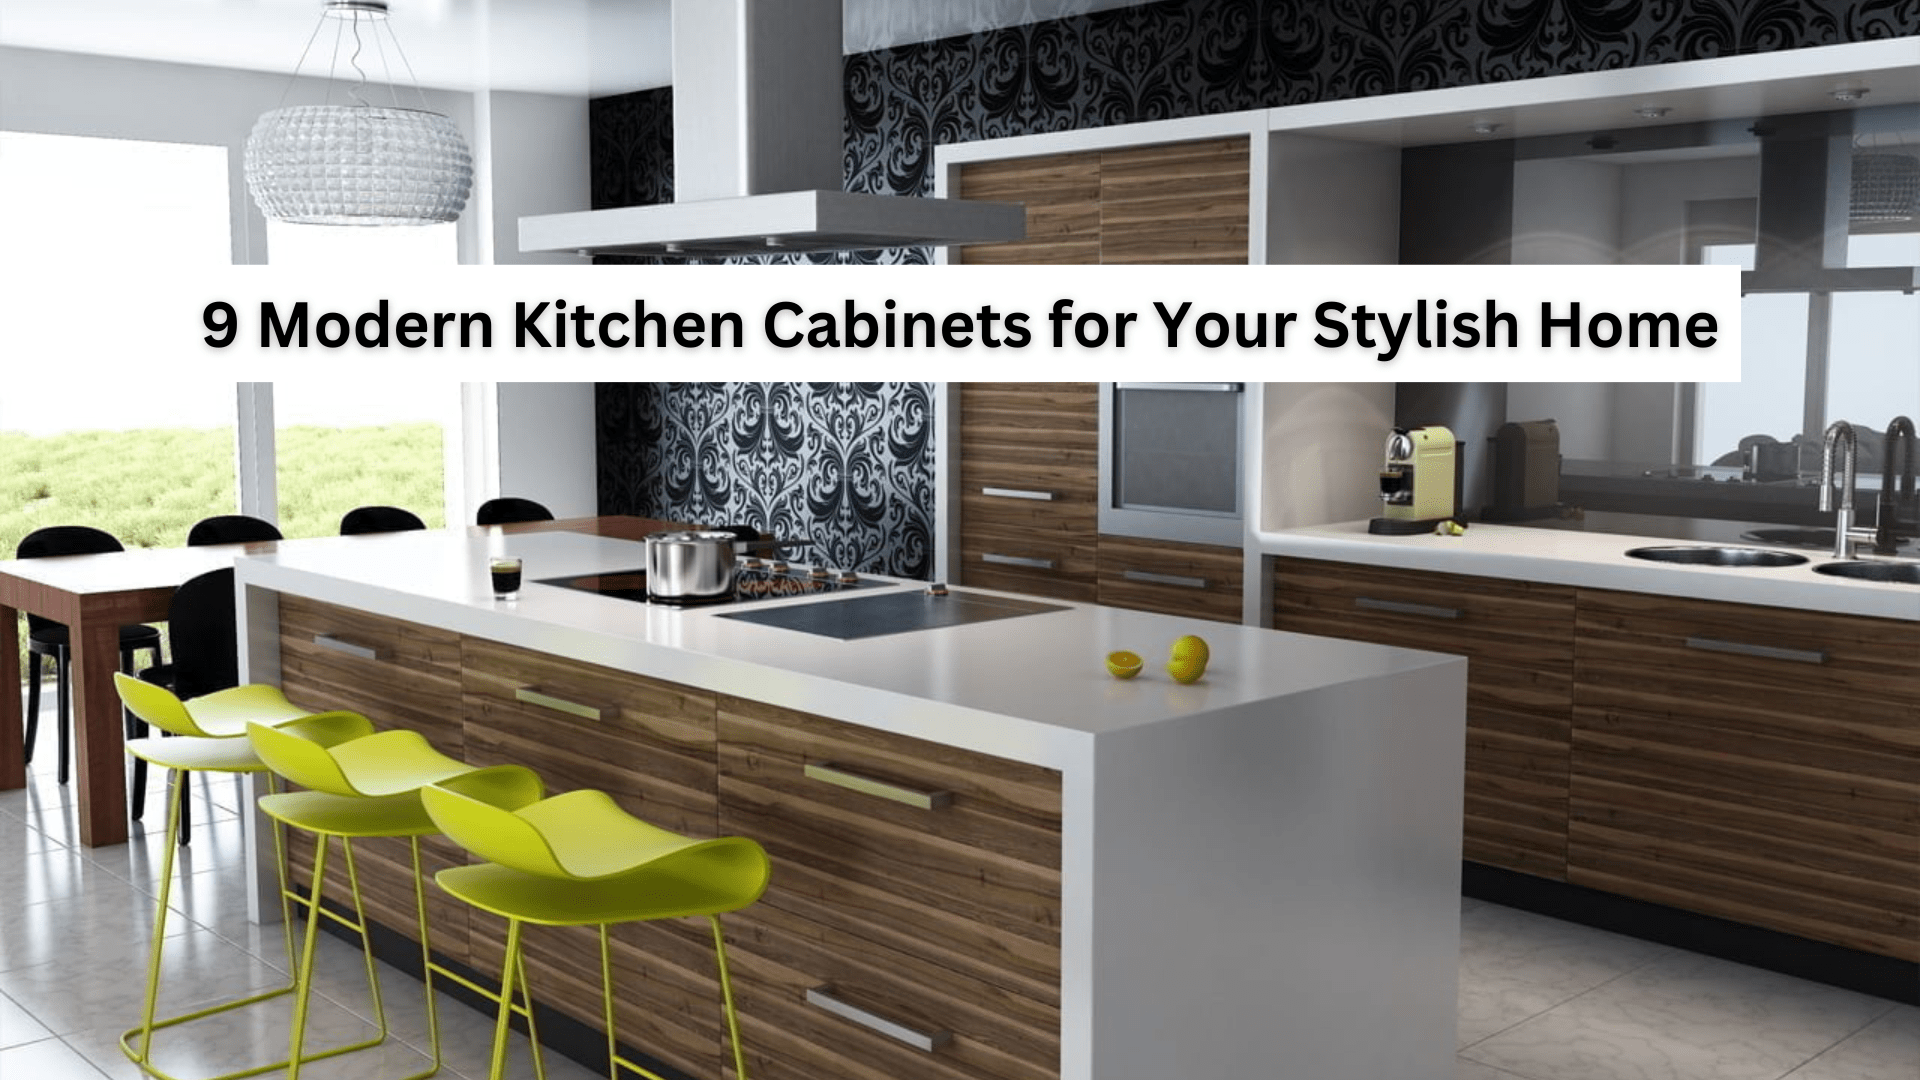 Modern Kitchen Cabinets for Your Stylish Home